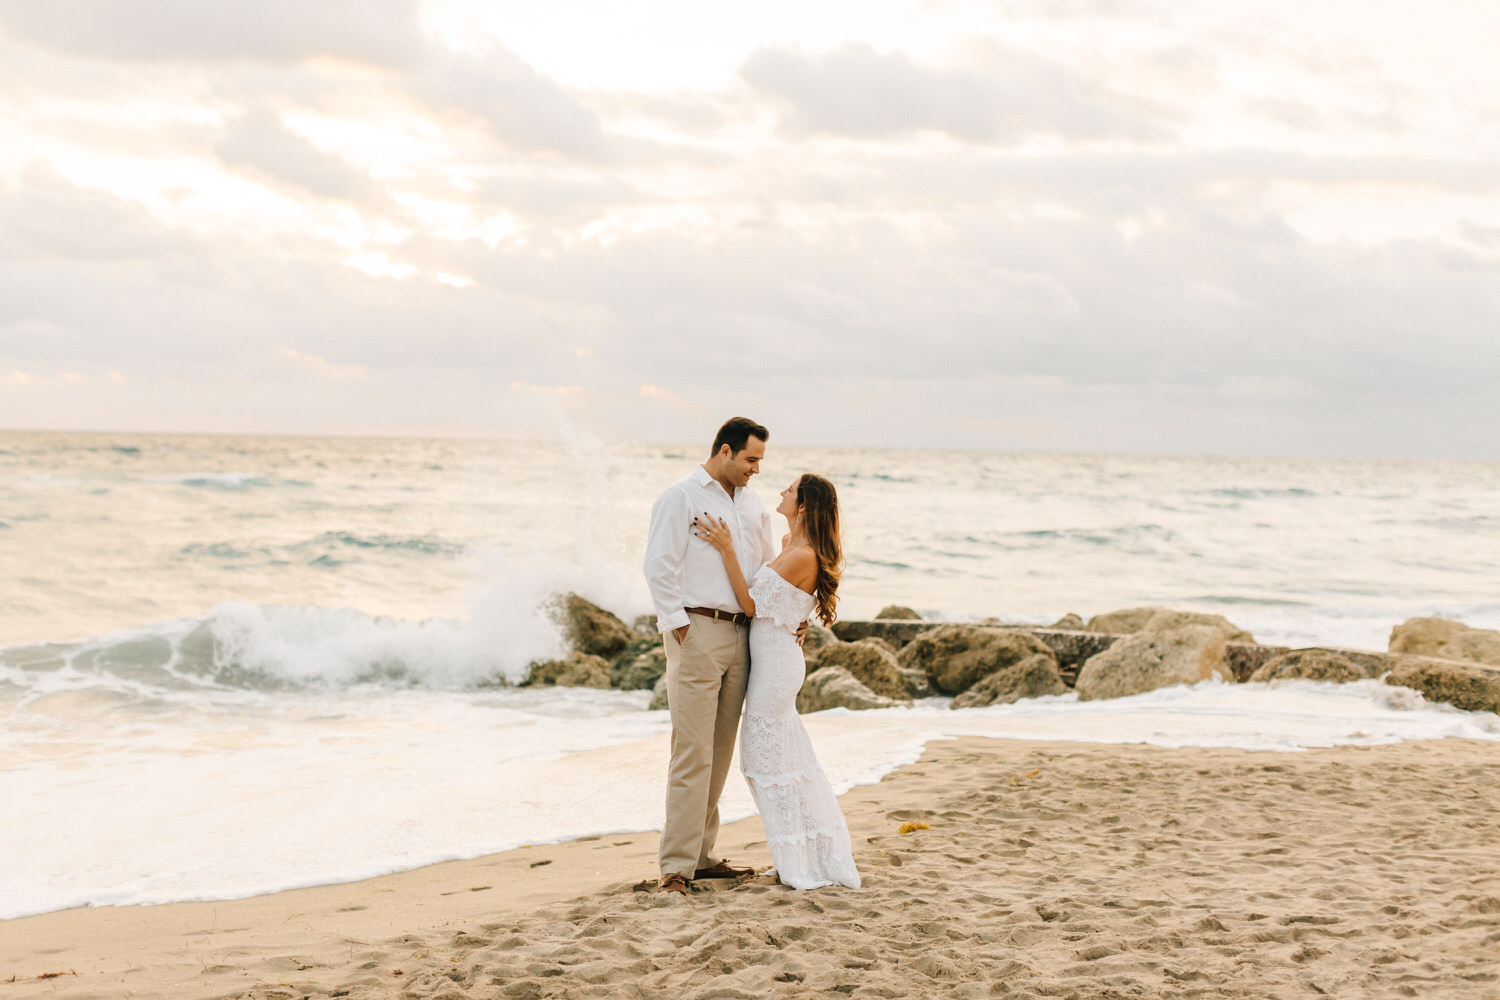 Kaylae and David's Palm Beach Worth Avenue Engagement Session